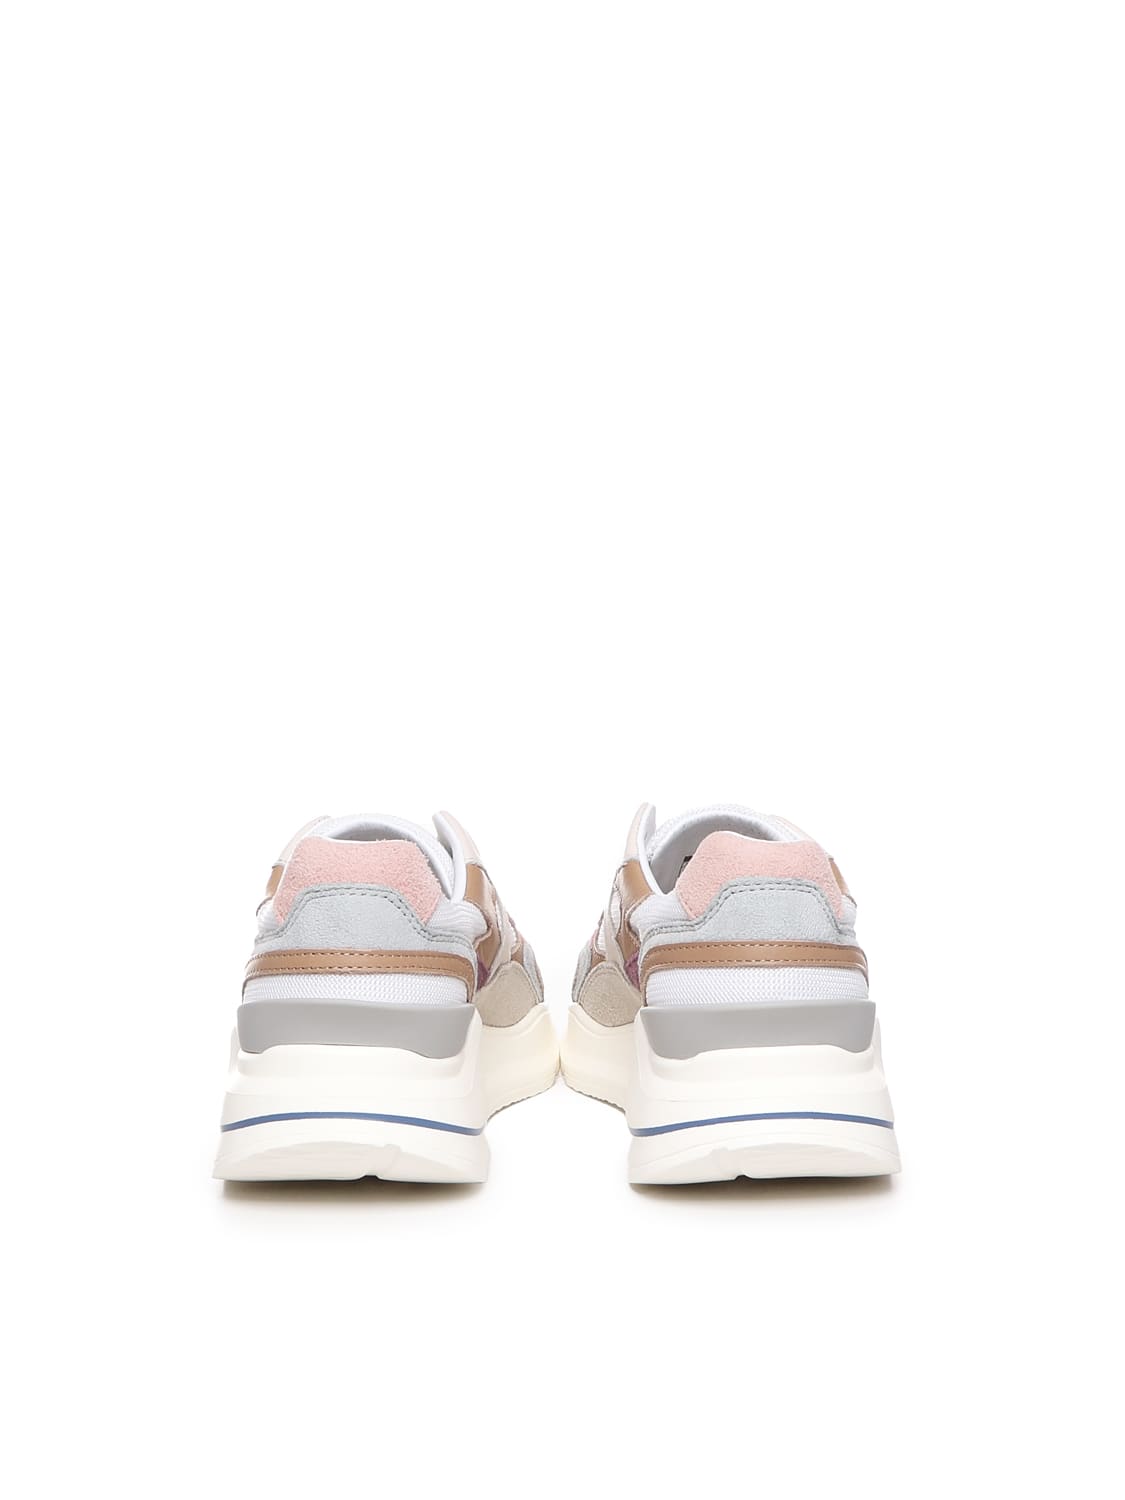 Shop Date Fuga Sneakers In White